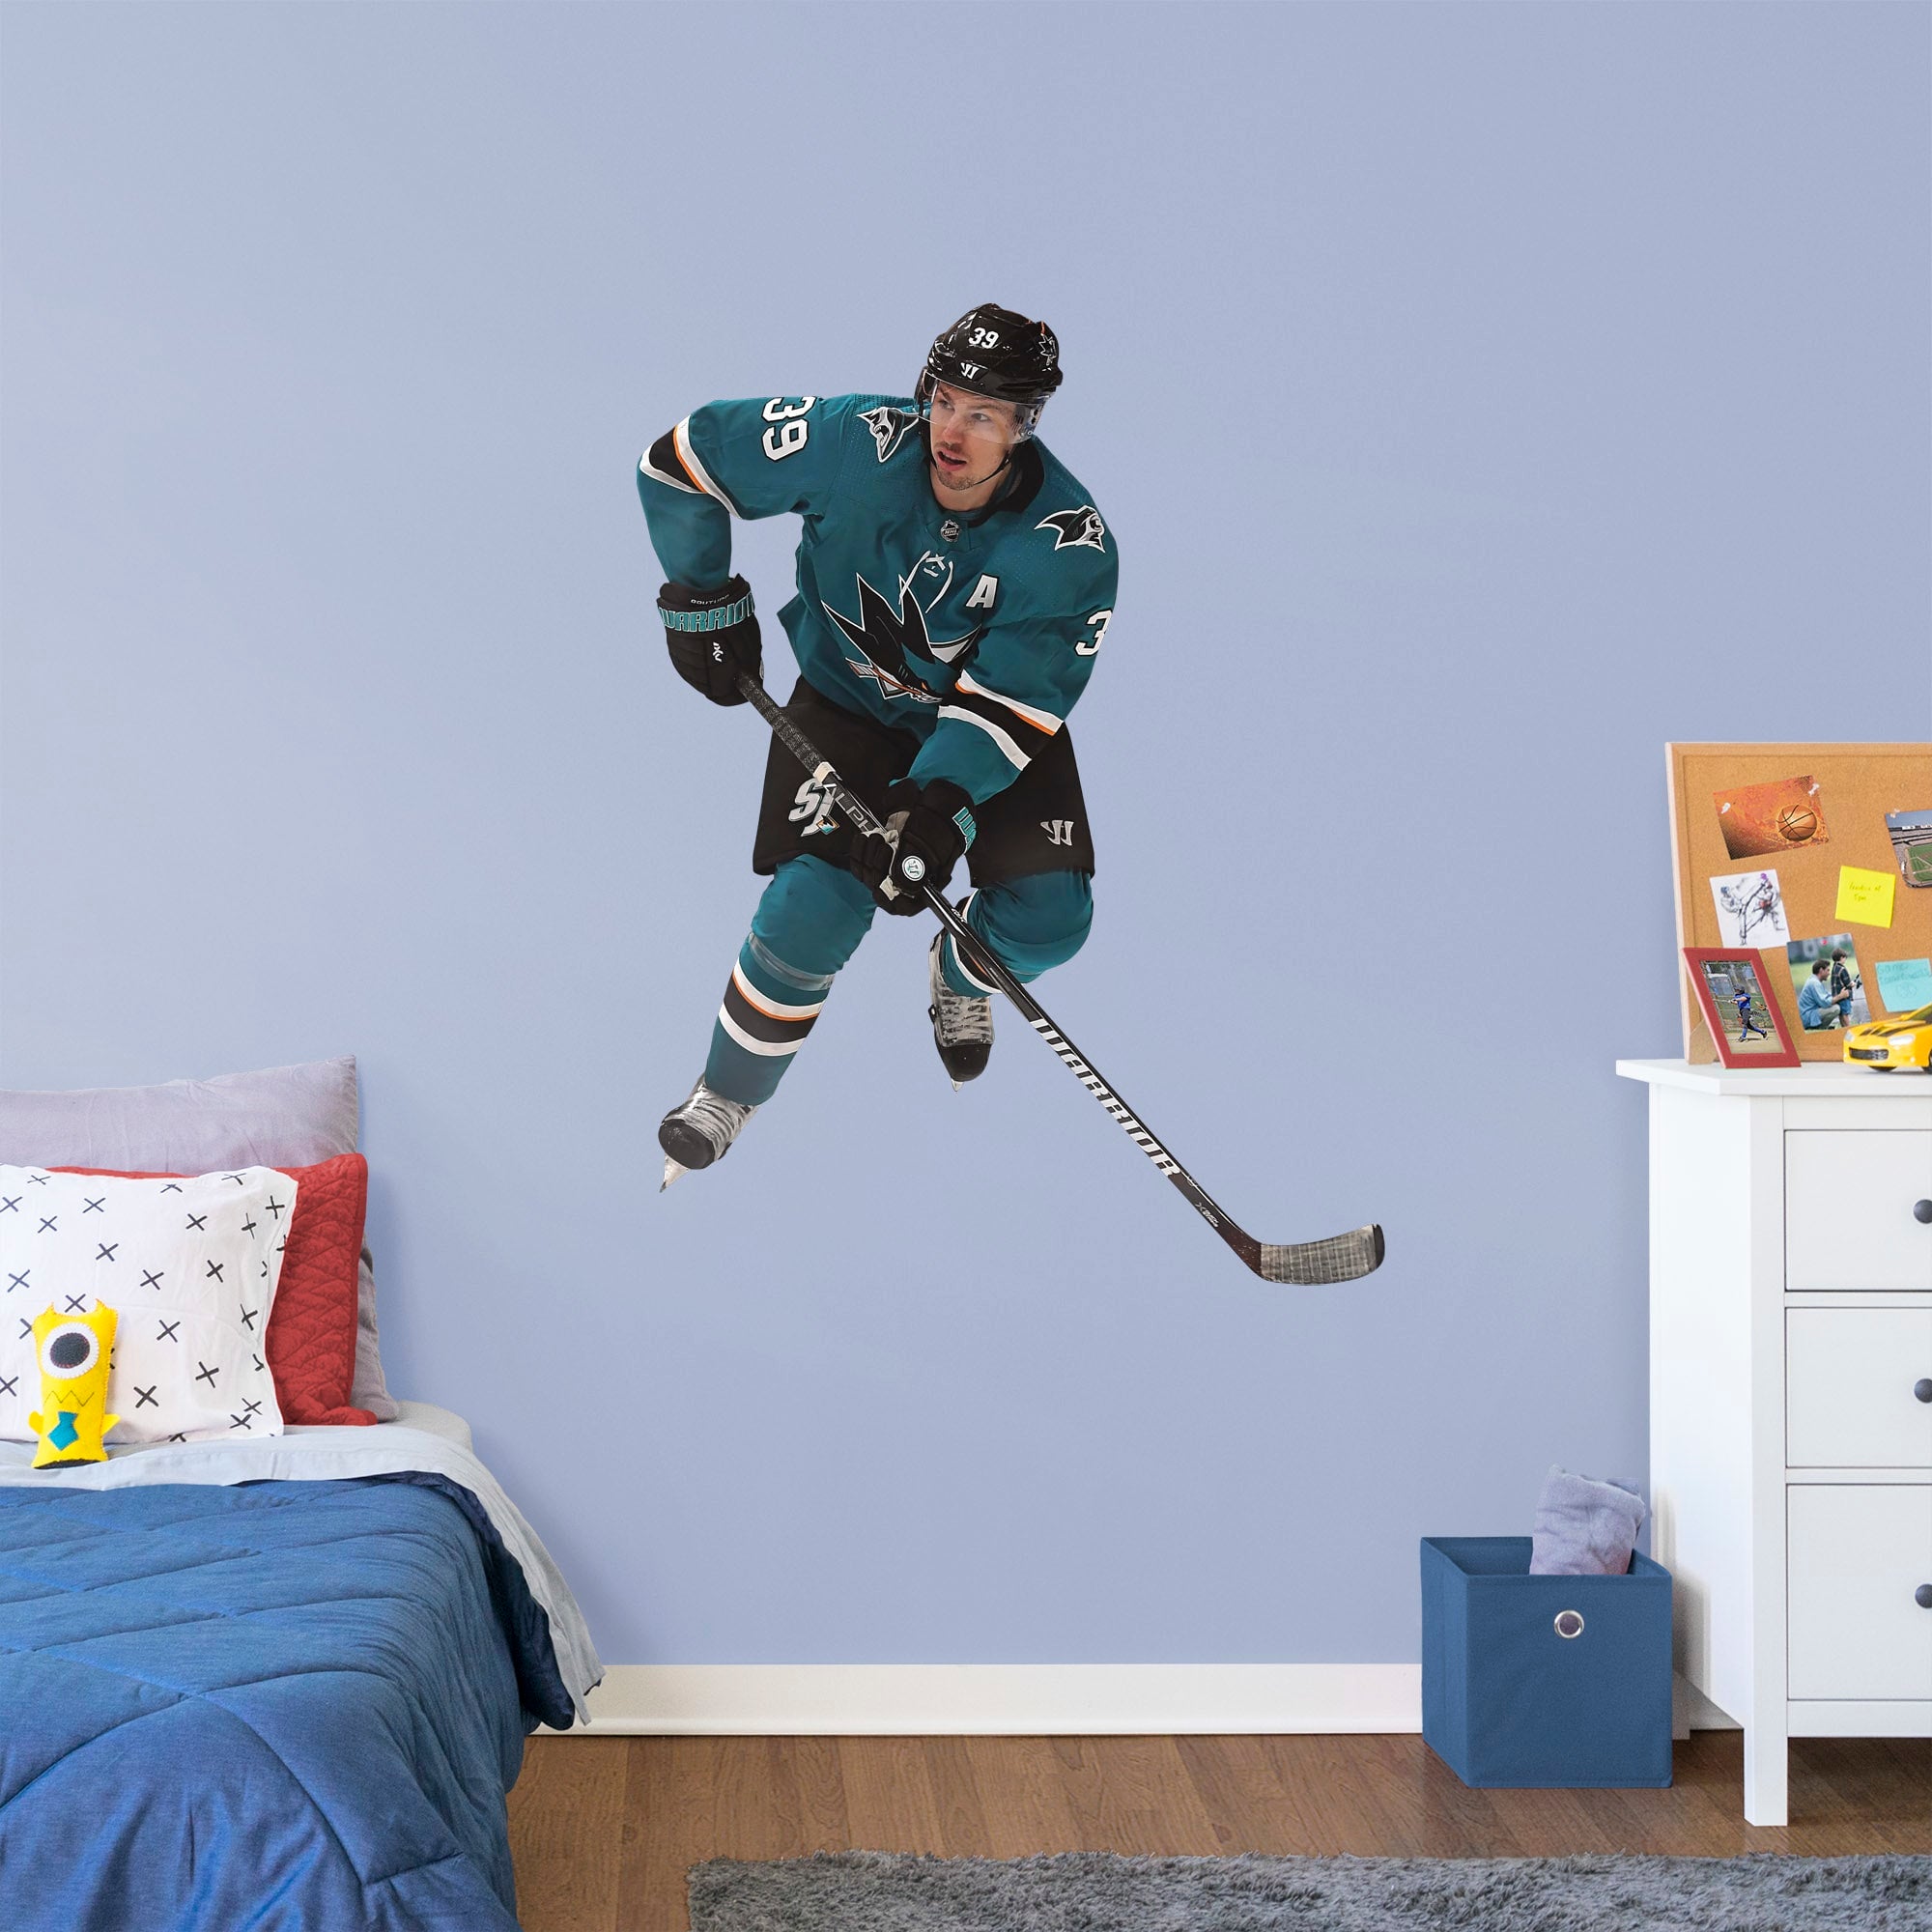 Logan Couture for San Jose Sharks - Officially Licensed NHL Removable Wall Decal Giant Athlete + 2 Decals (42"W x 55"H) by Fathe